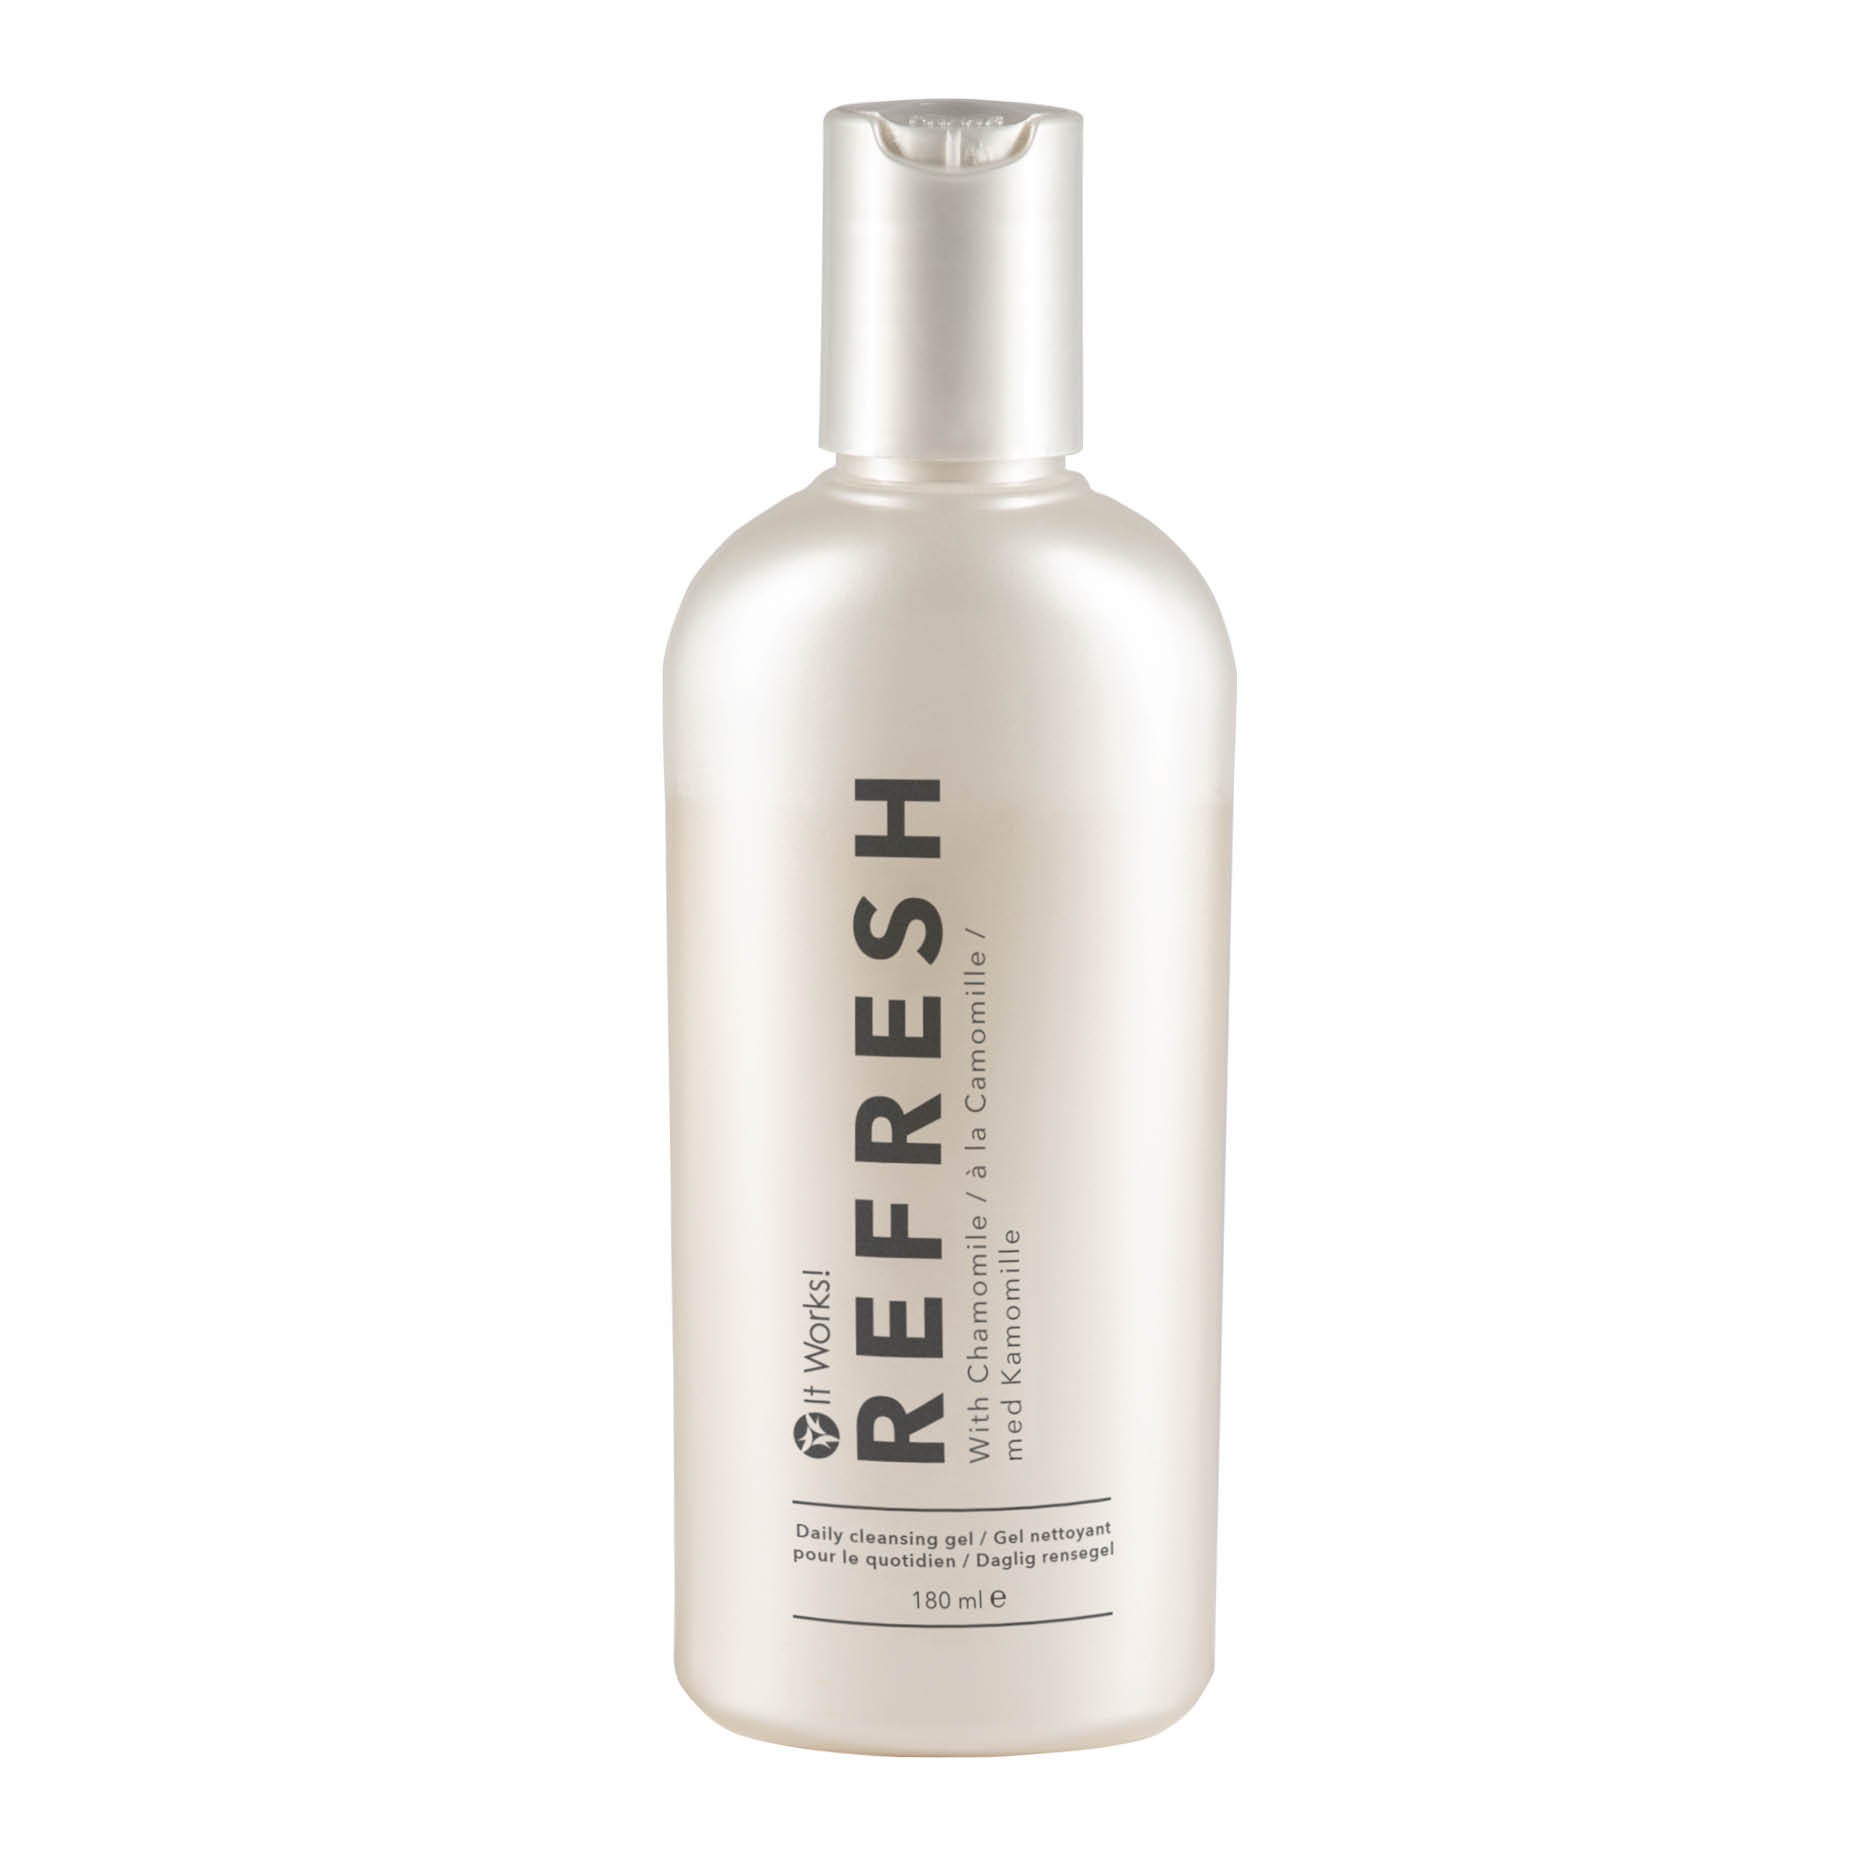 Refresh it works chamomile cleansing gel